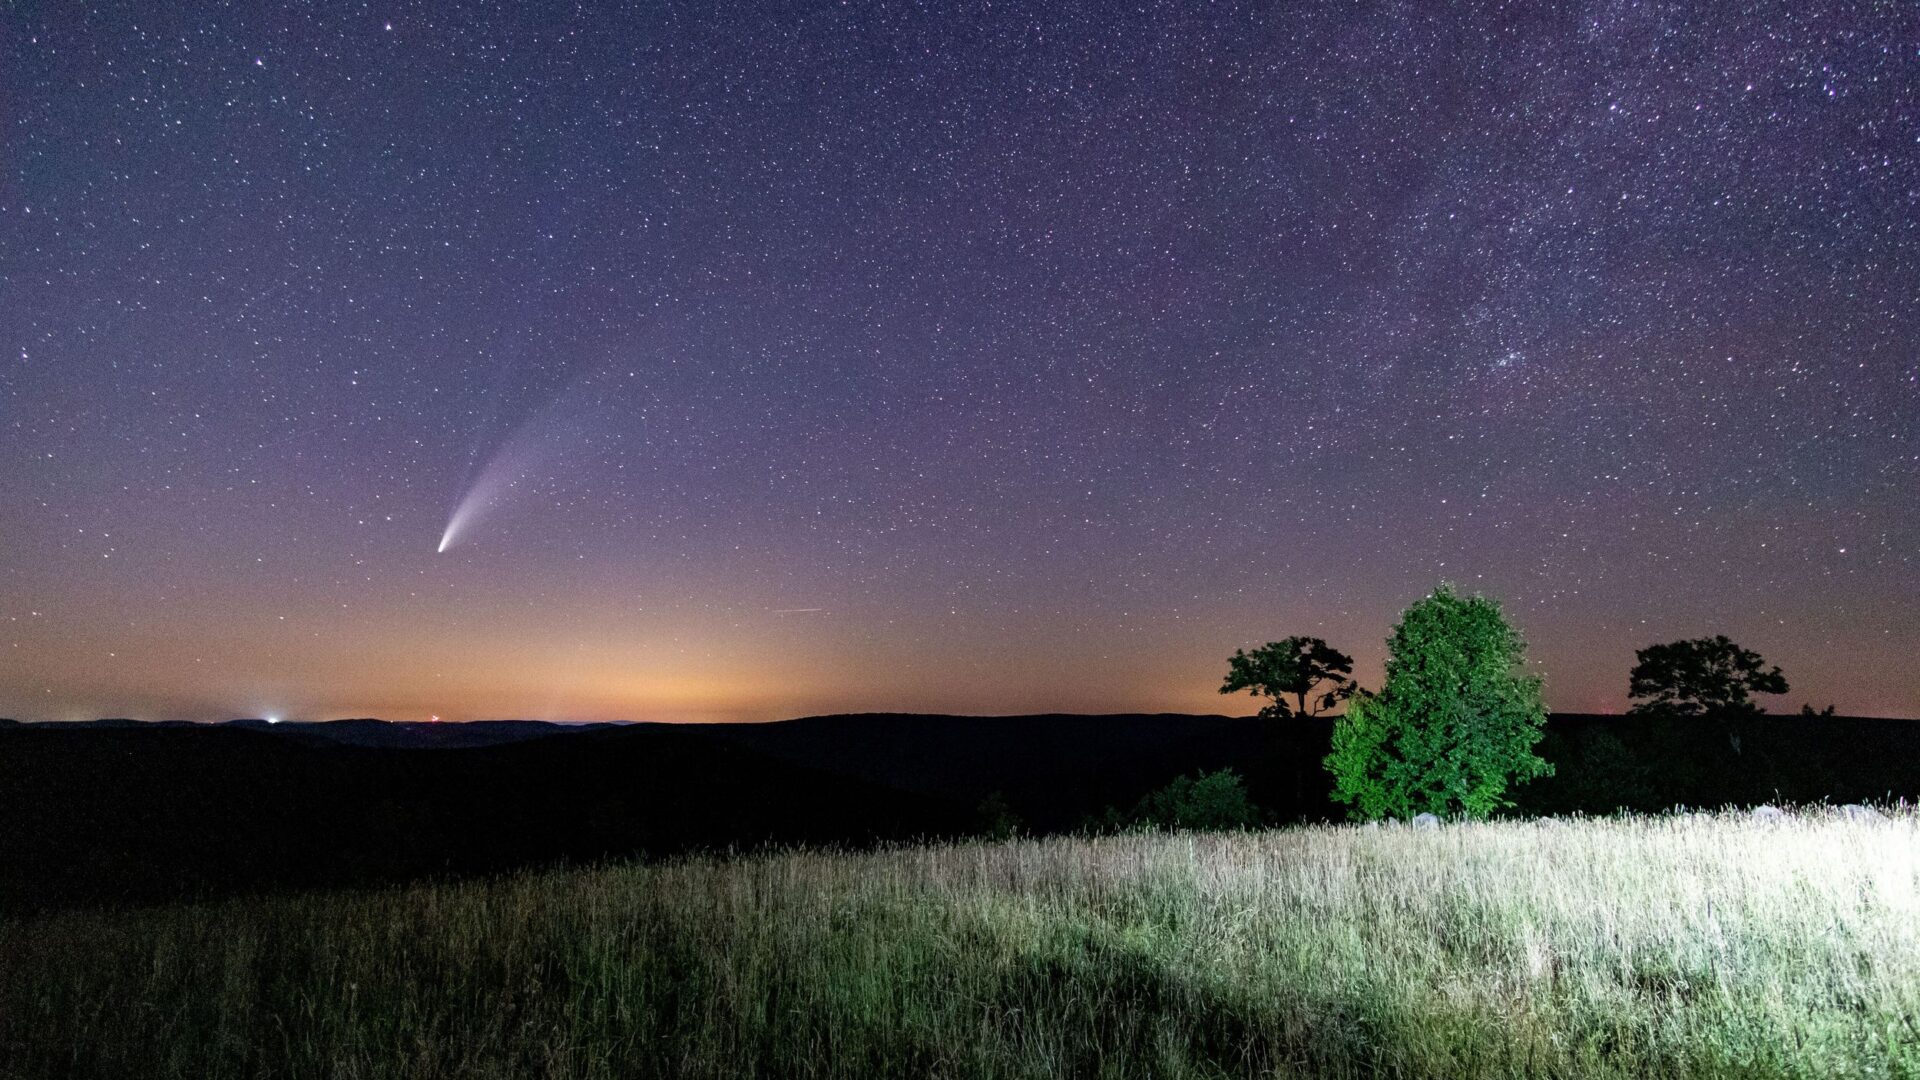 Light pollution is slowing encroaching on the Pennsylvania Wilds. Environmental groups and residents are suggesting regulations that protect night sky views and the commerce they bring.